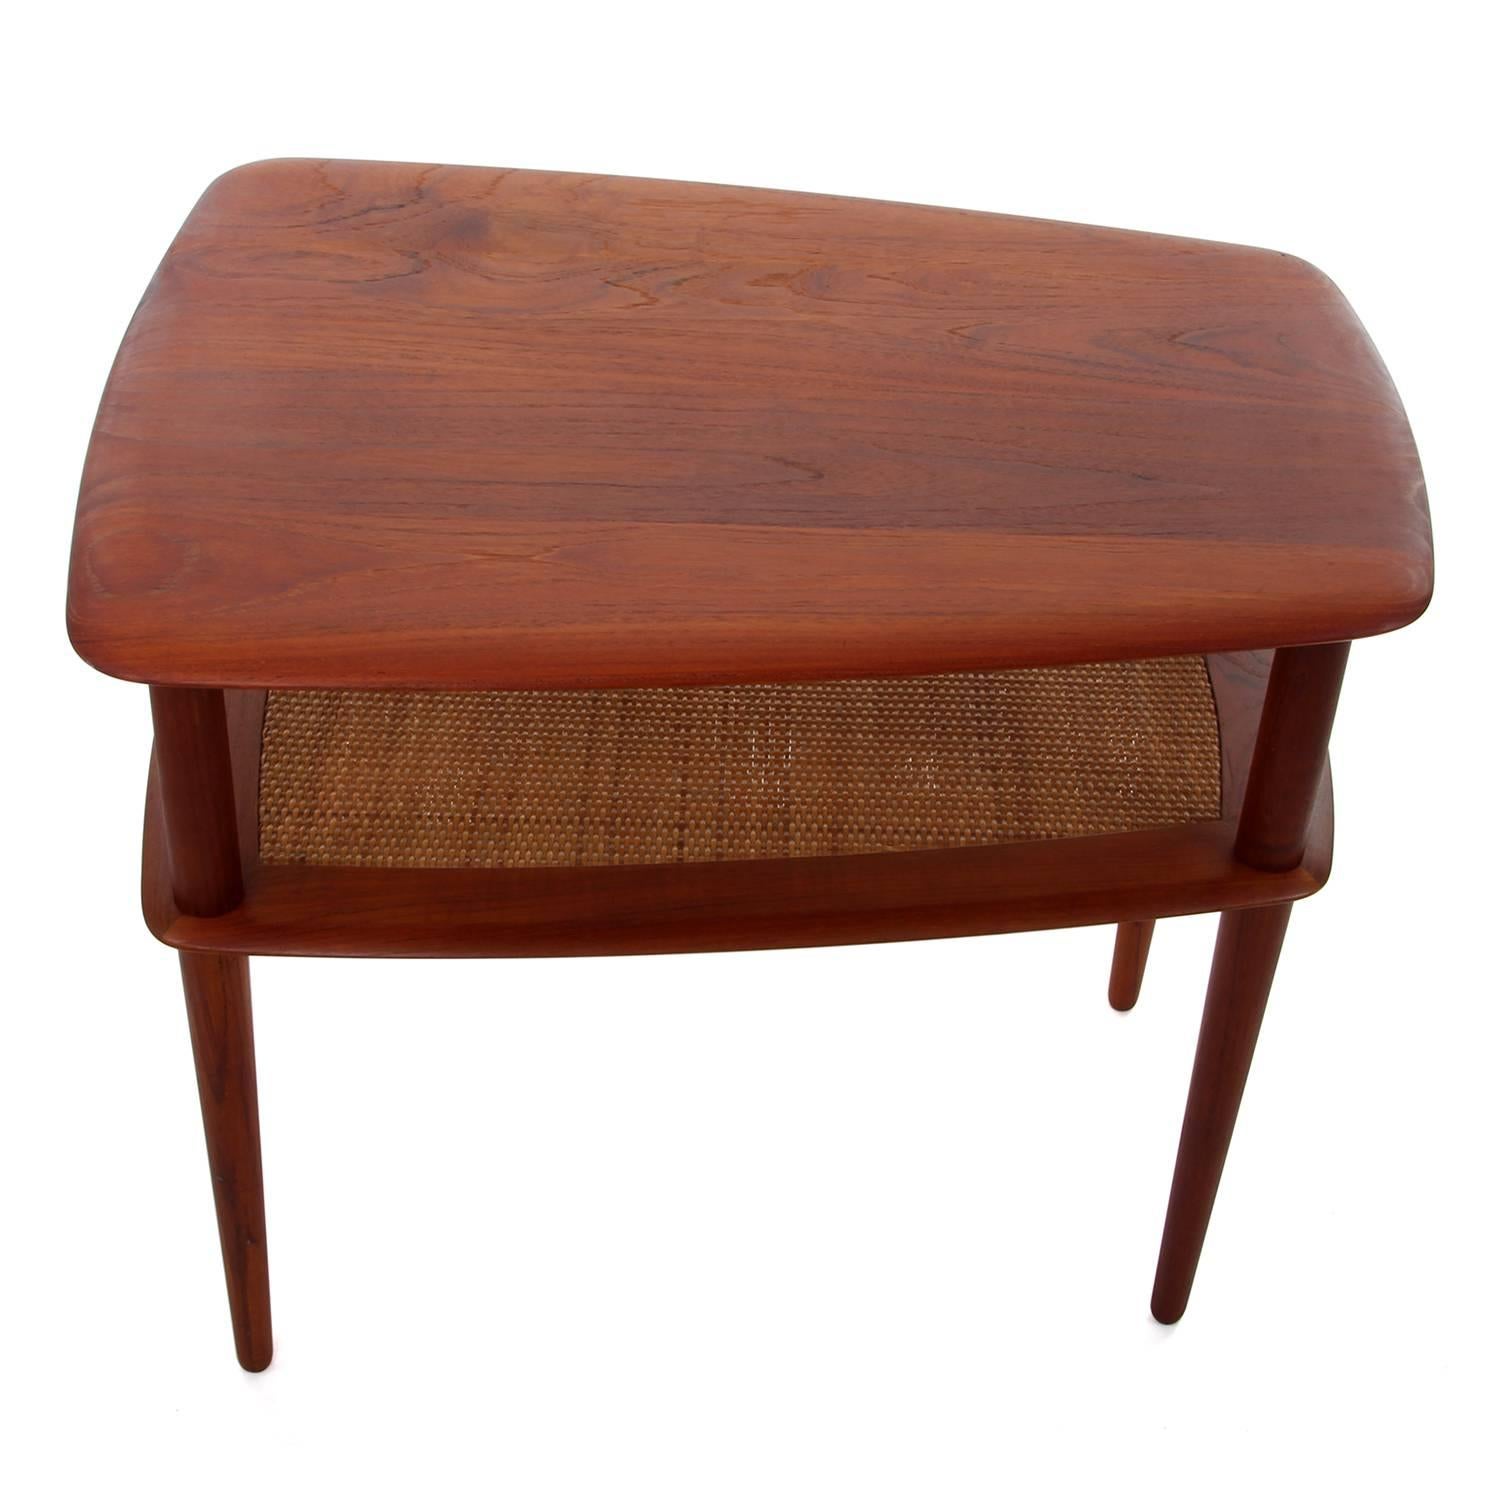 20th Century FD 518 Teak Lamp Table by Hvidt & Molgaard for France and Son, 1956 For Sale